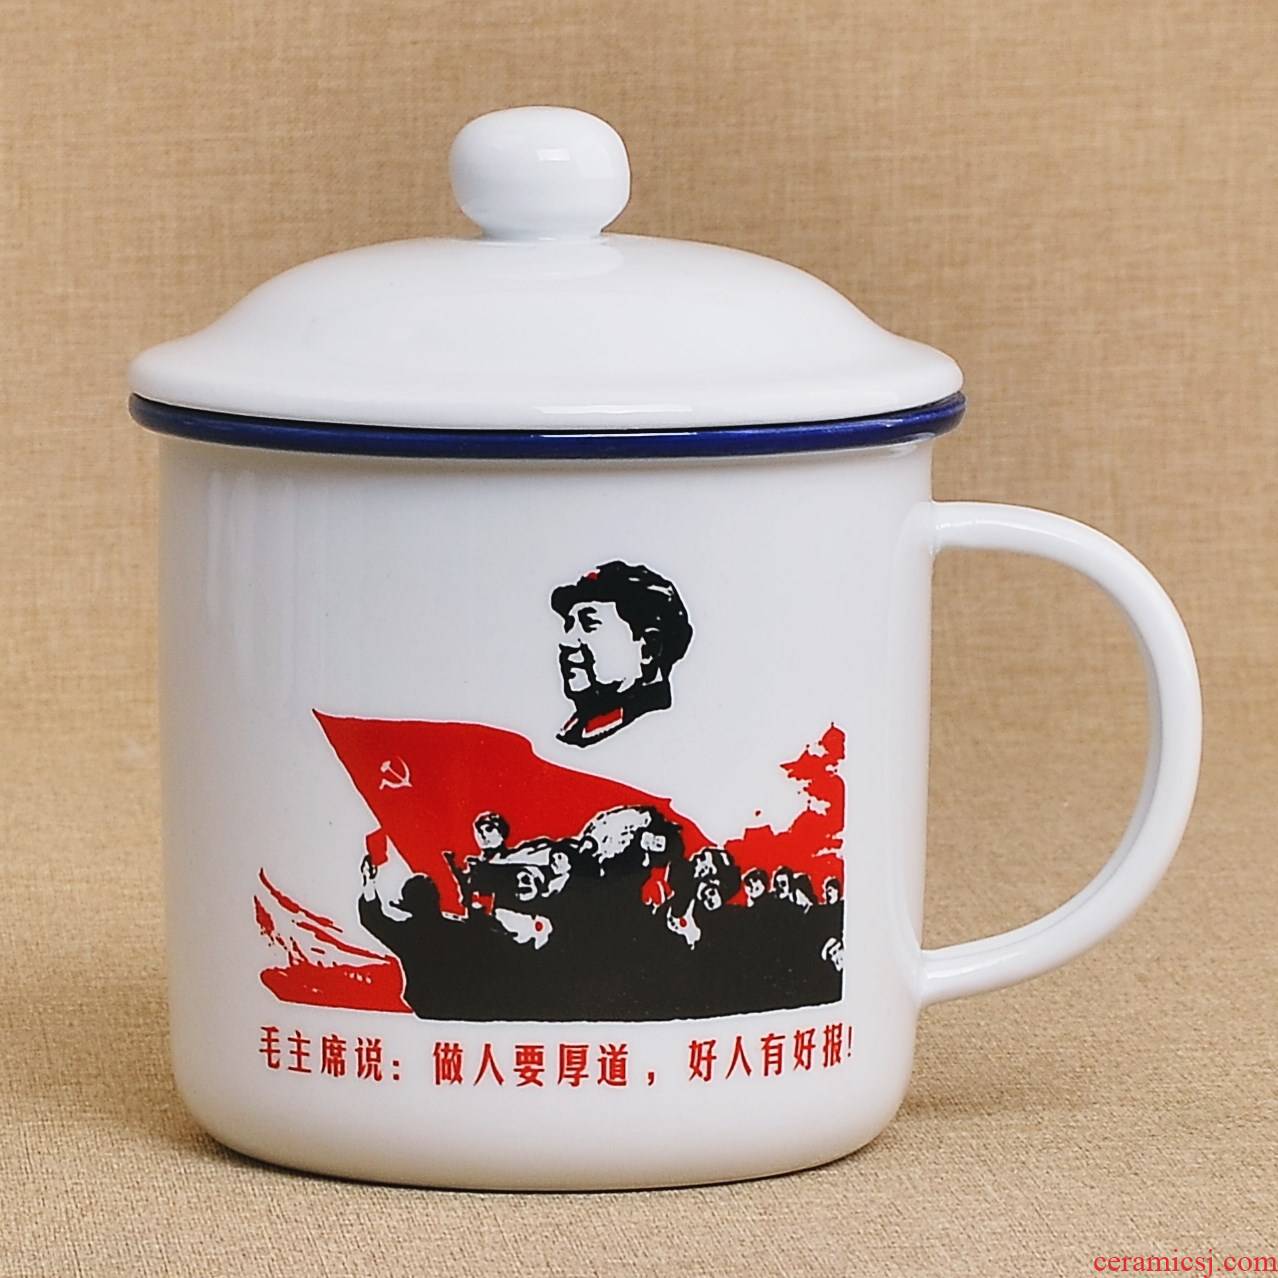 Small tea urn ginseng wine ChaGangZi chairman MAO MAO name nostalgic old iron magnetic steel cups cup enamel cup